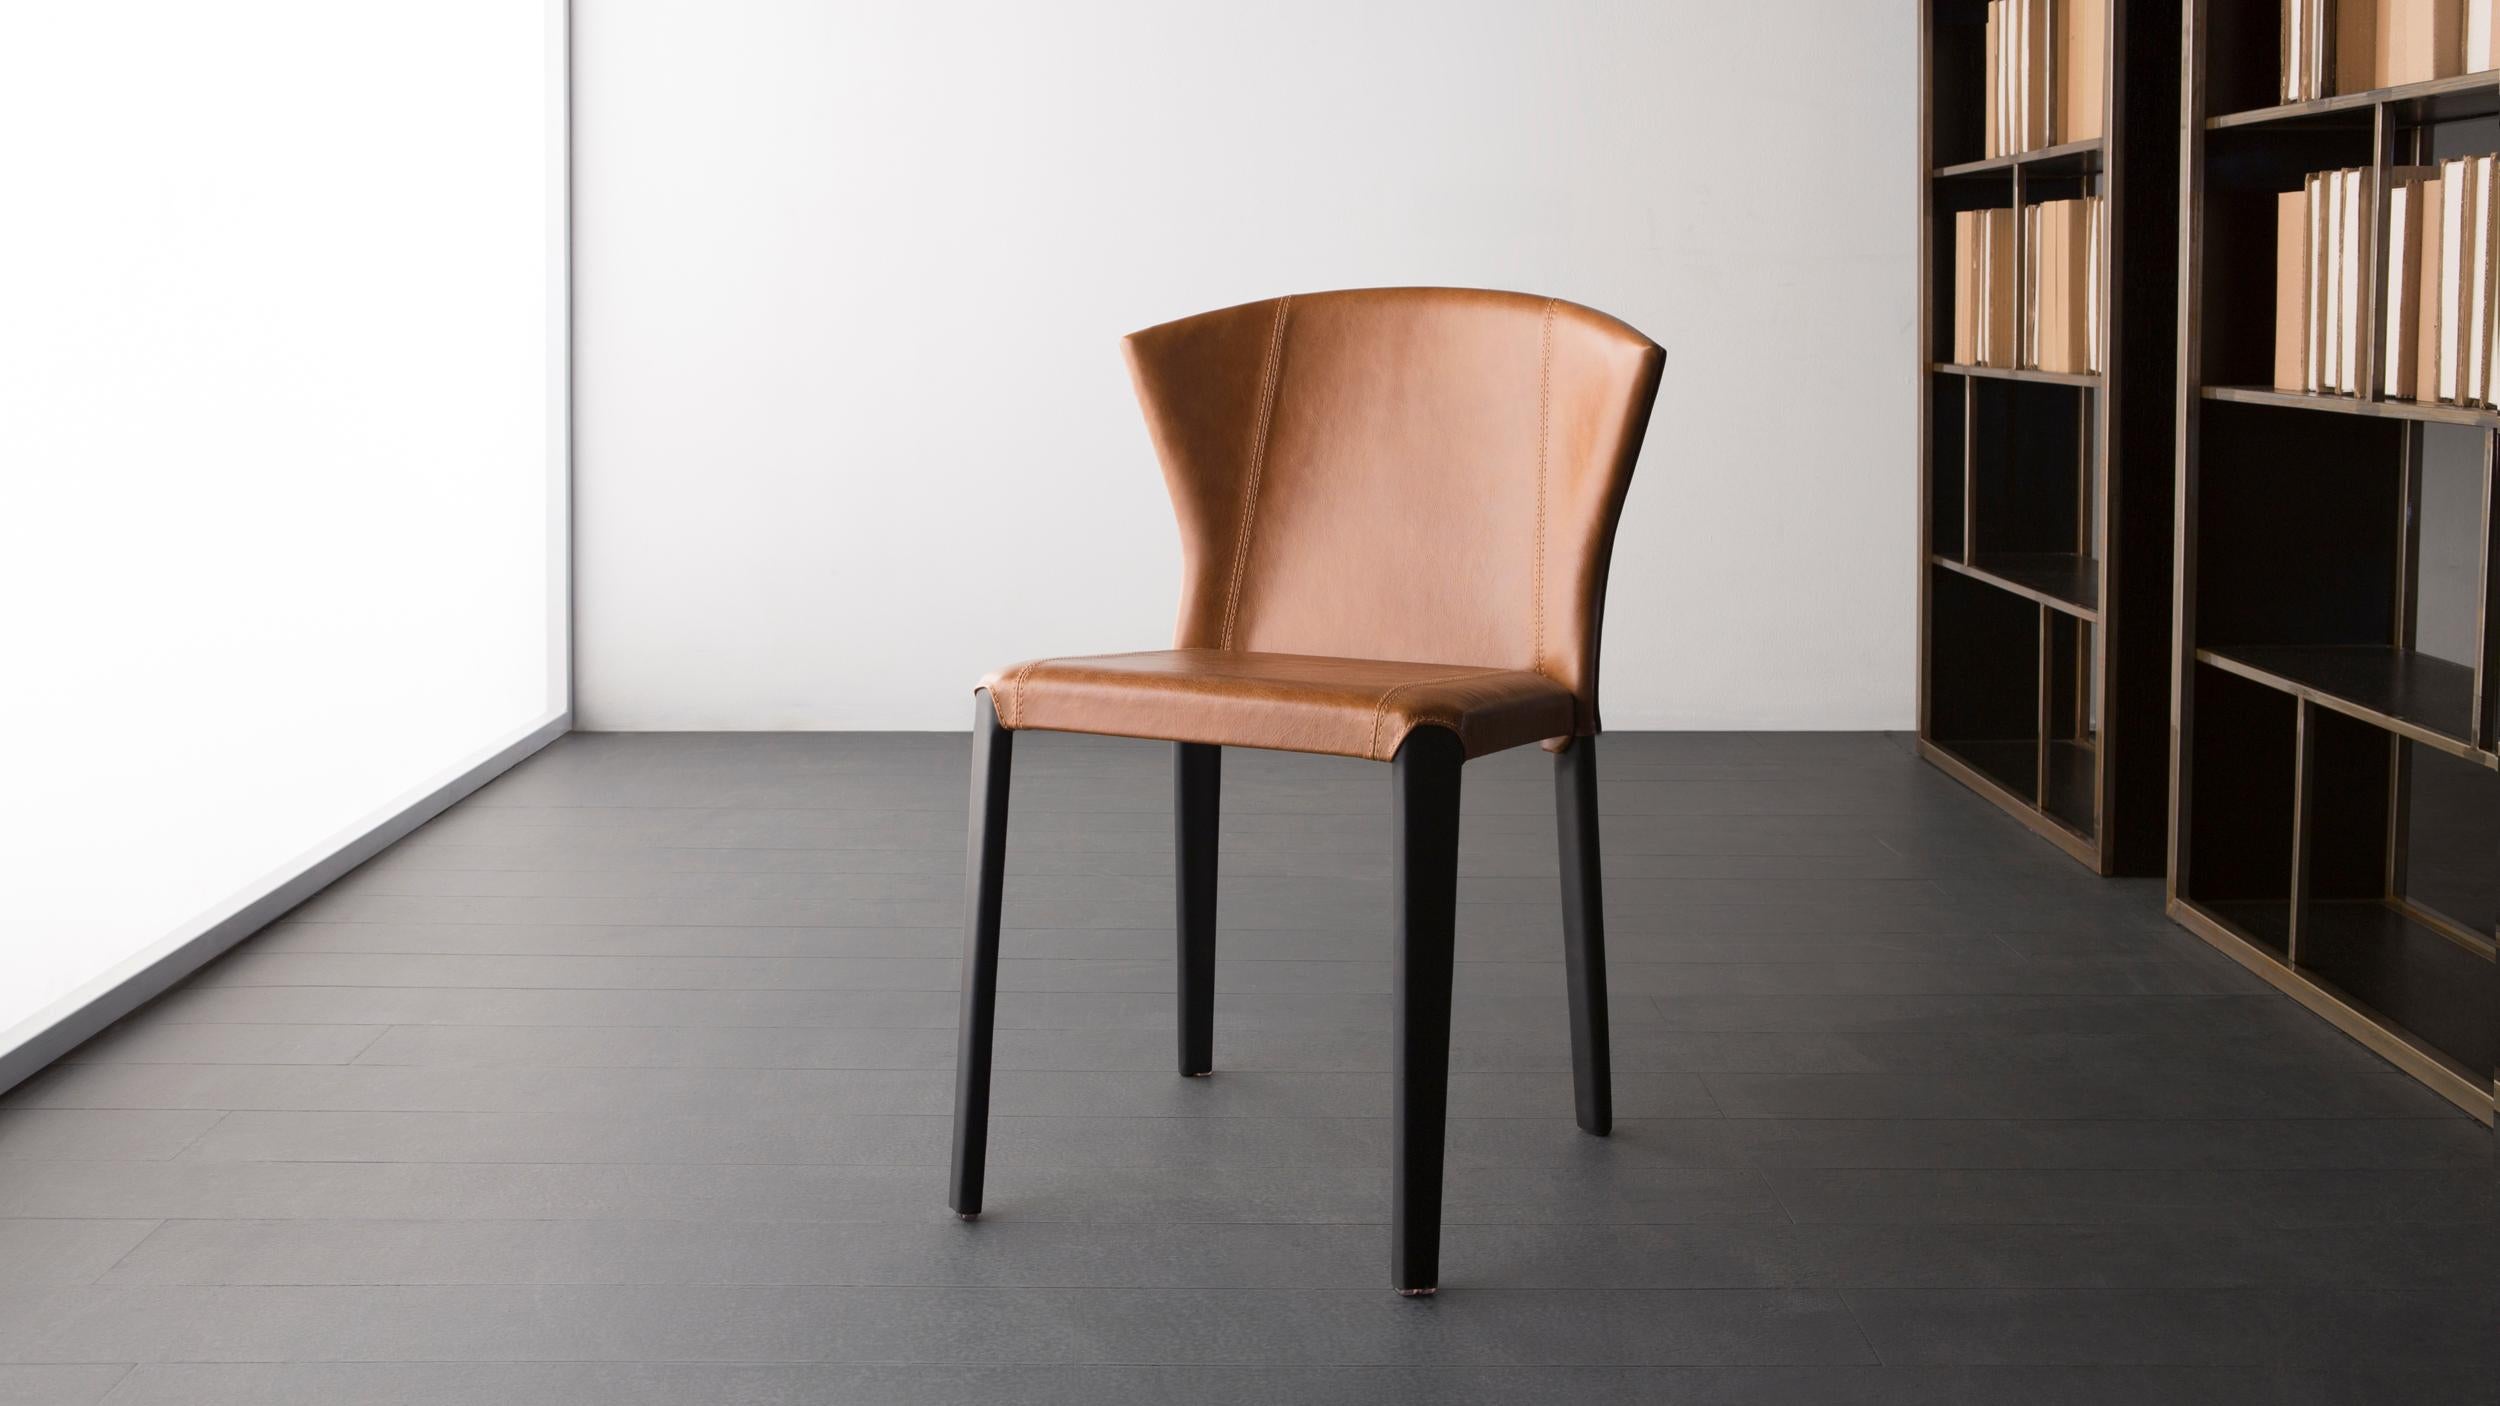 Tork Chair by Doimo Brasil
Dimensions: W 51 x D 58 x H 81 cm 
Materials: Metal, Leather.


With the intention of providing good taste and personality, Doimo deciphers trends and follows the evolution of man and his space. To this end, it translates